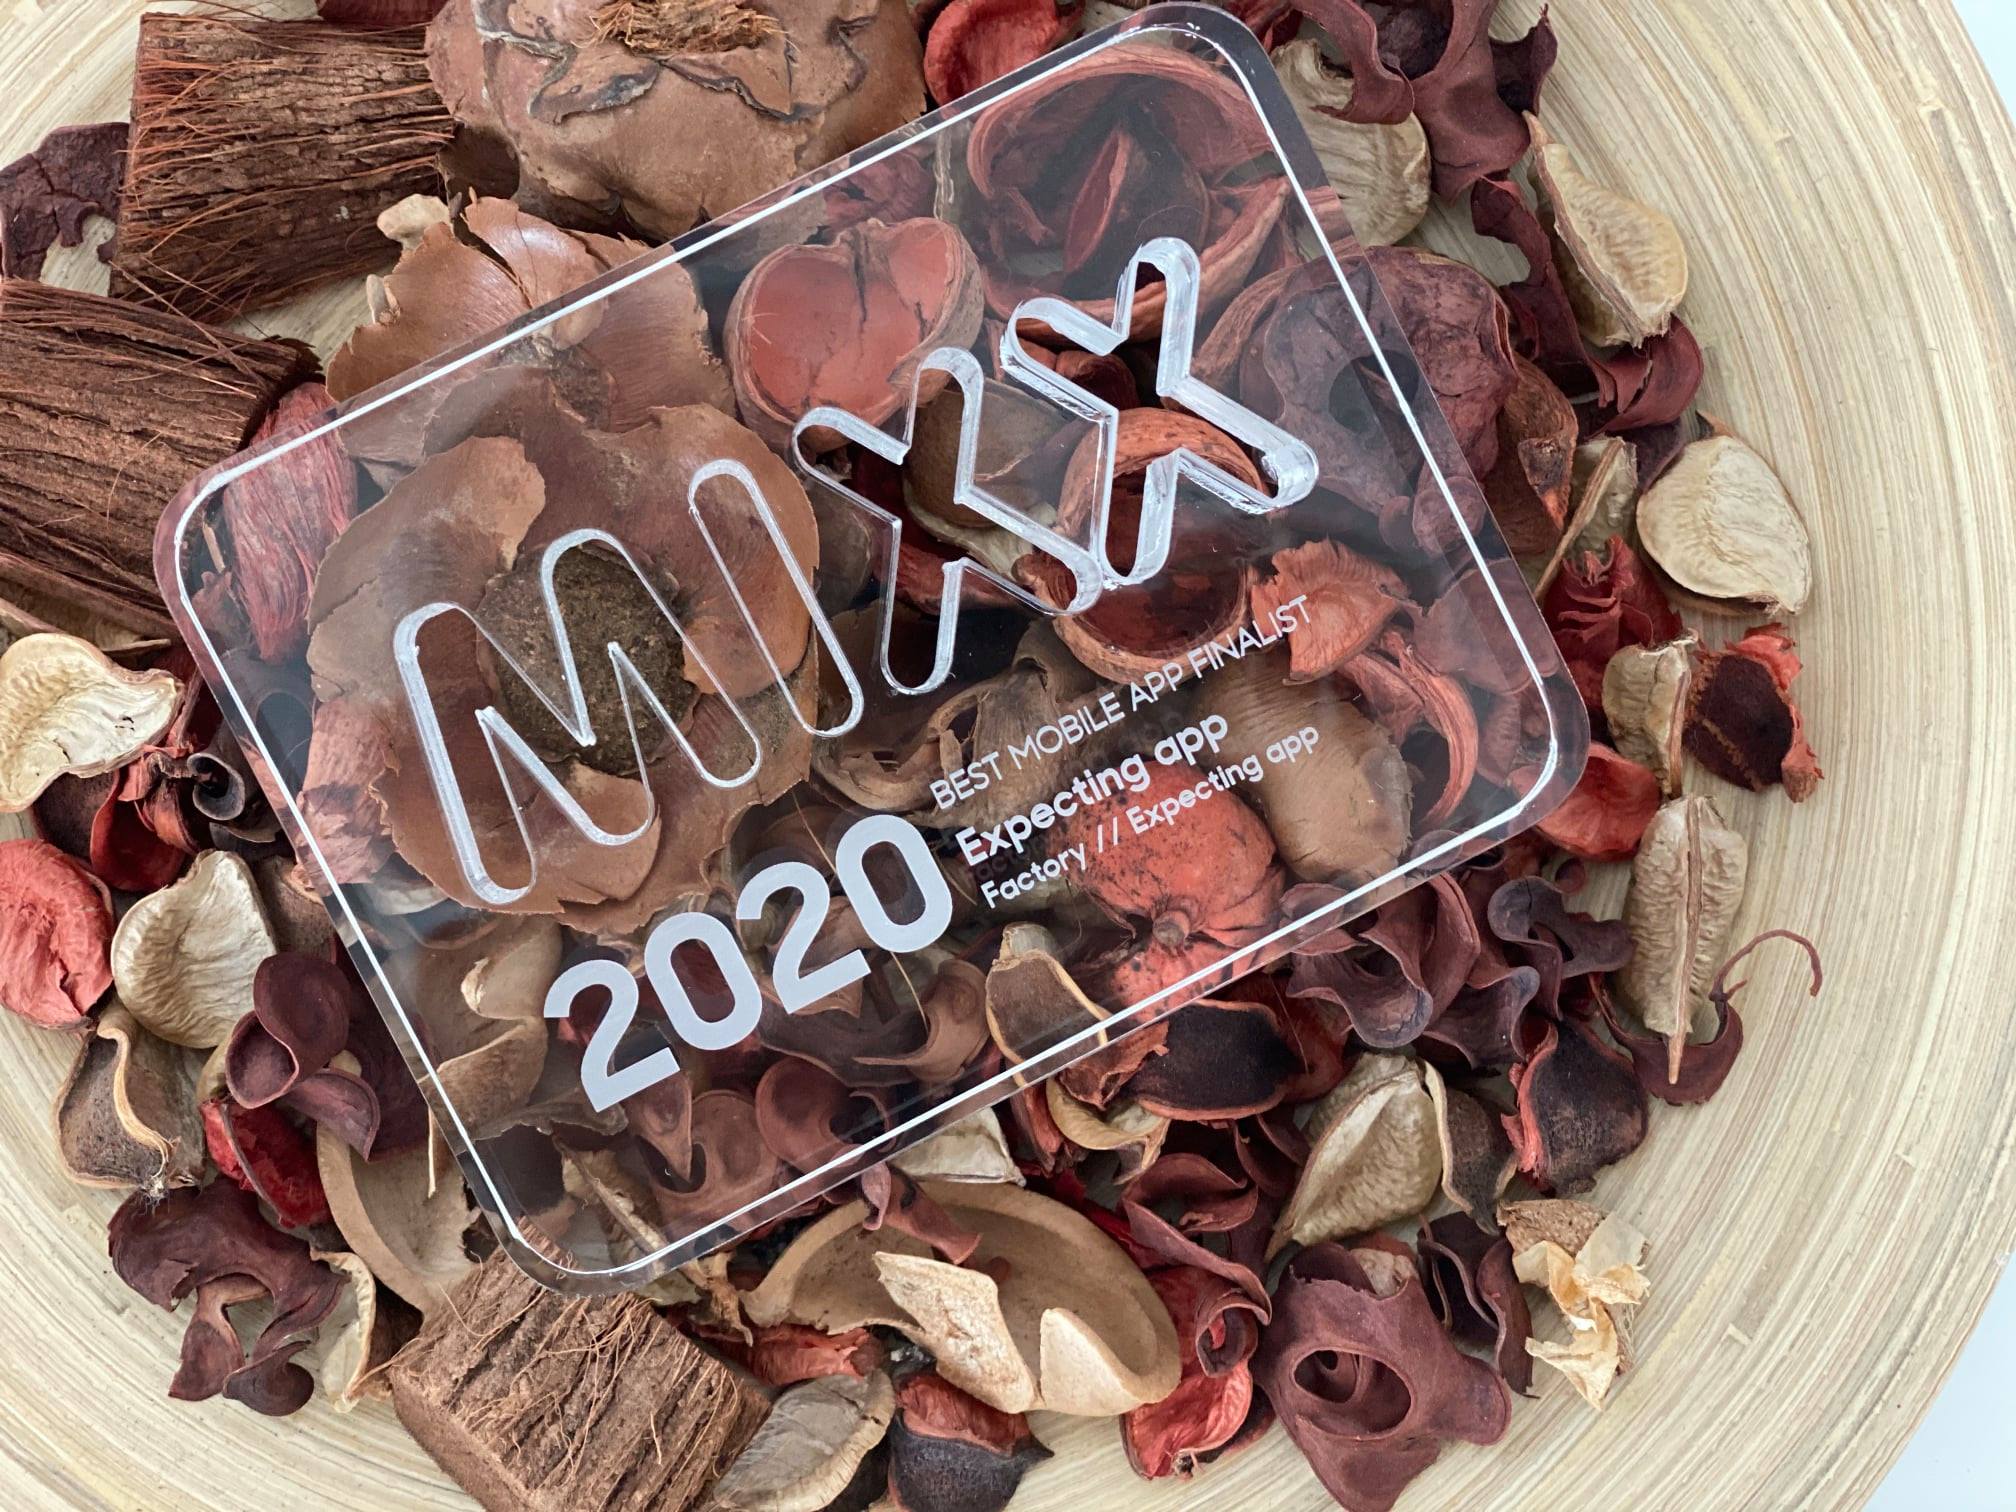 MIXX award for best mobile app finalist in 2020